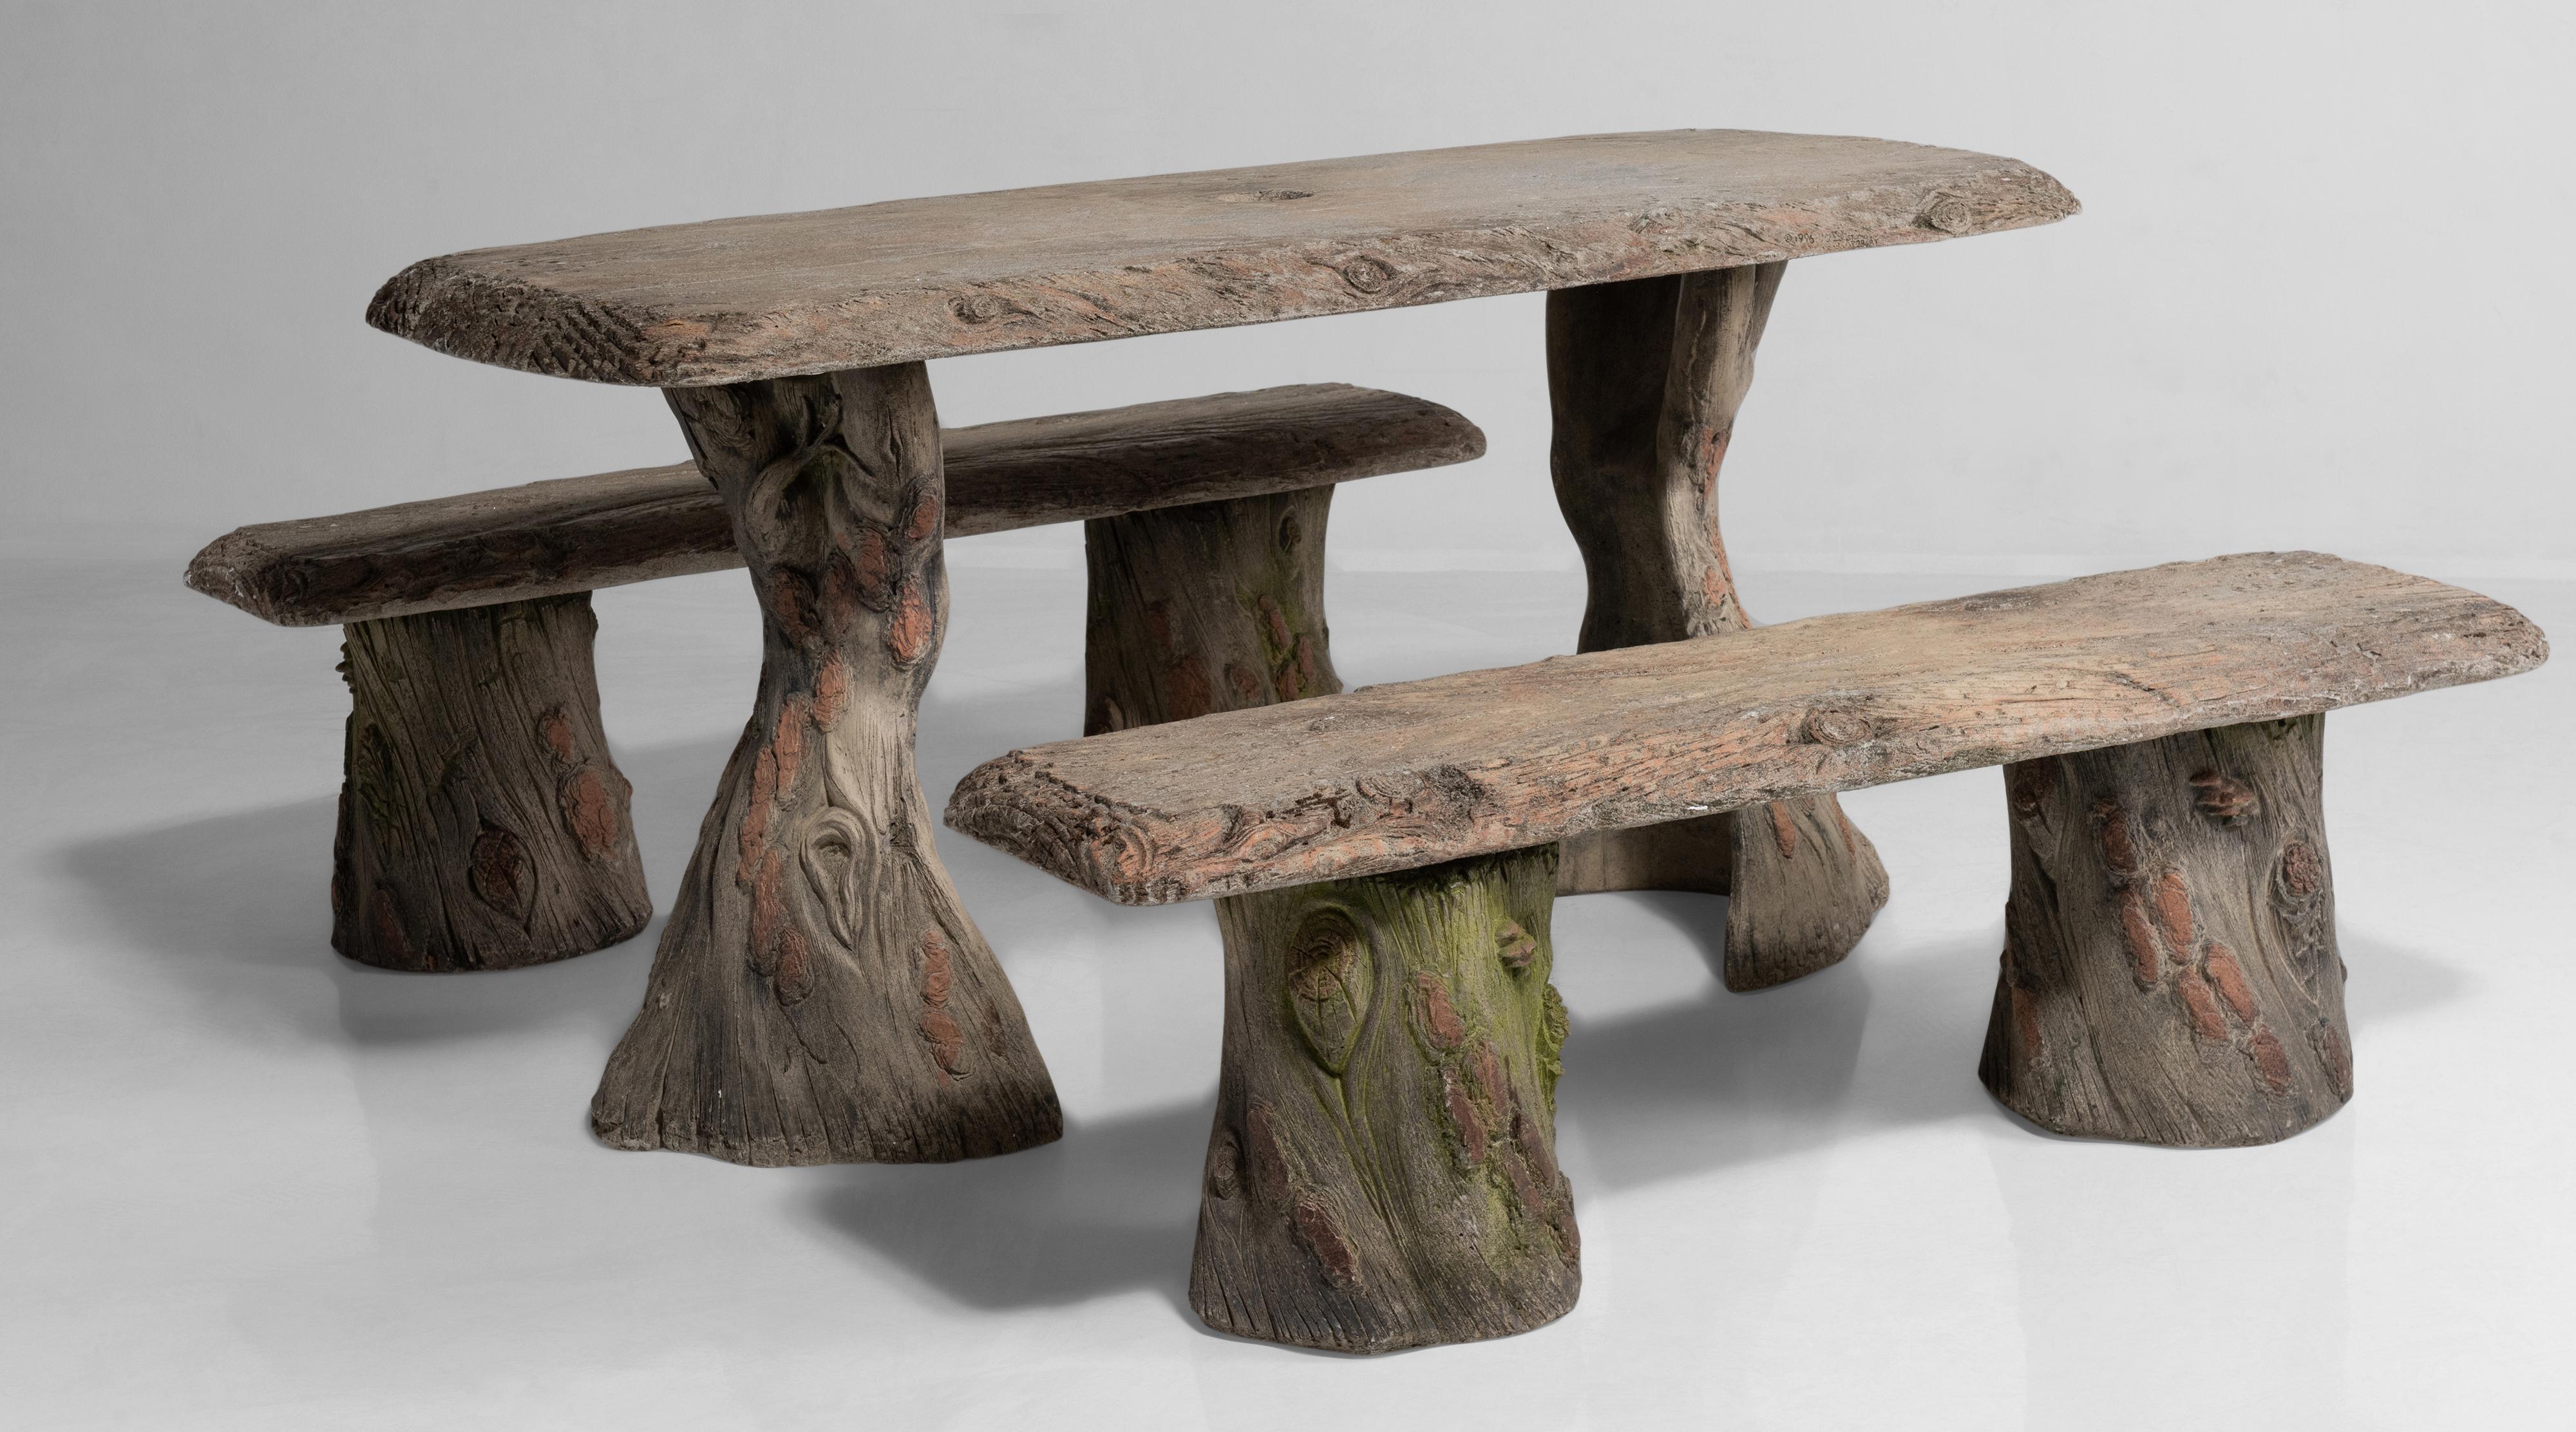 Faux Bois garden table with benches, France, 20th century.

Cast concrete with detailed carving and weathered paint. Umbrella stand included.

Measures: Table: 59.5” W x 29.25” D x 29” H, bench: 53.5” W x 14.75” D x 16.5” H.